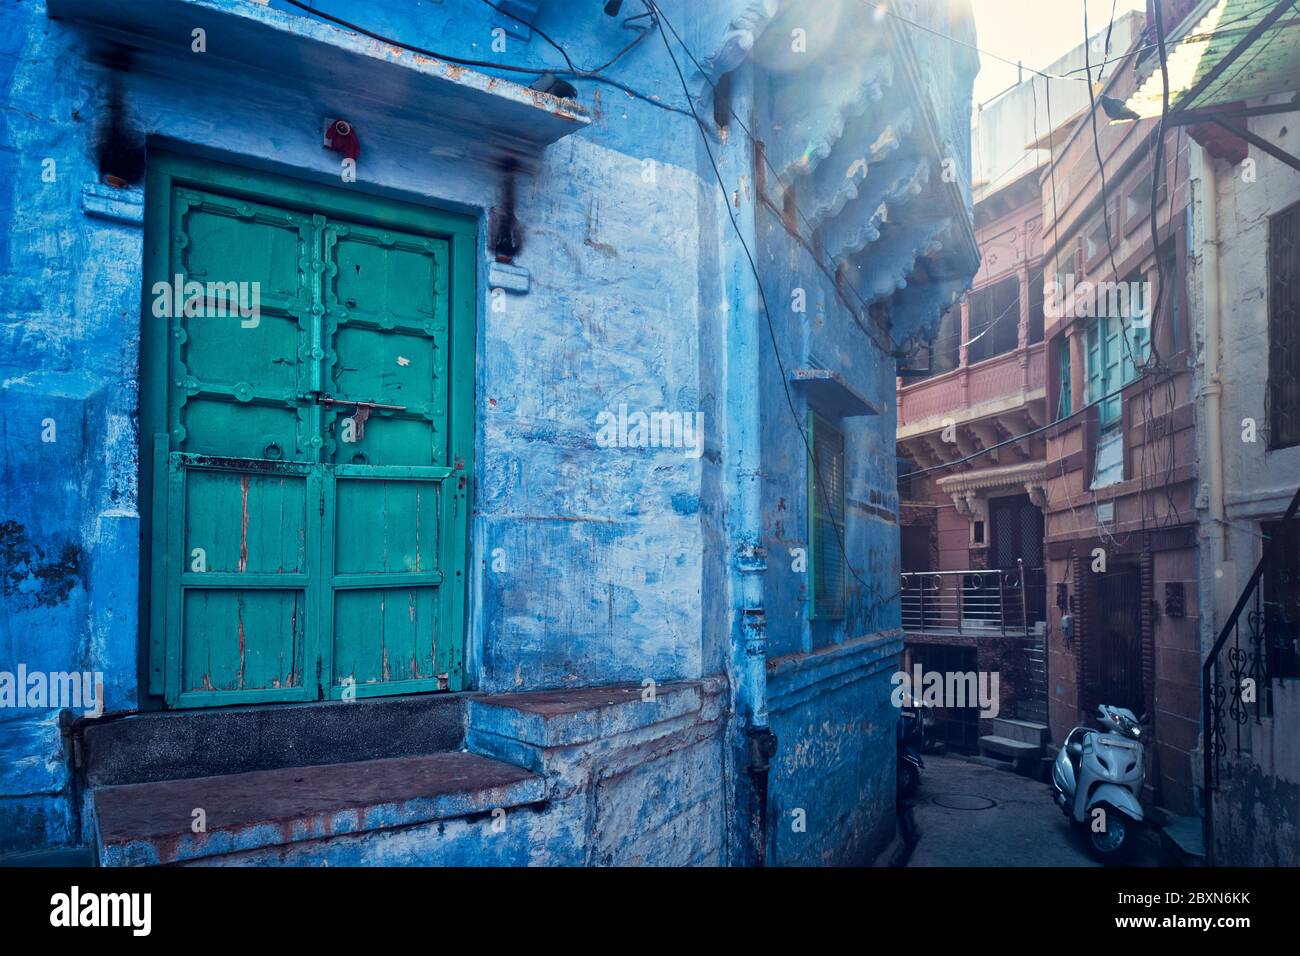 Blue houses in streets of of Jodhpur Stock Photo